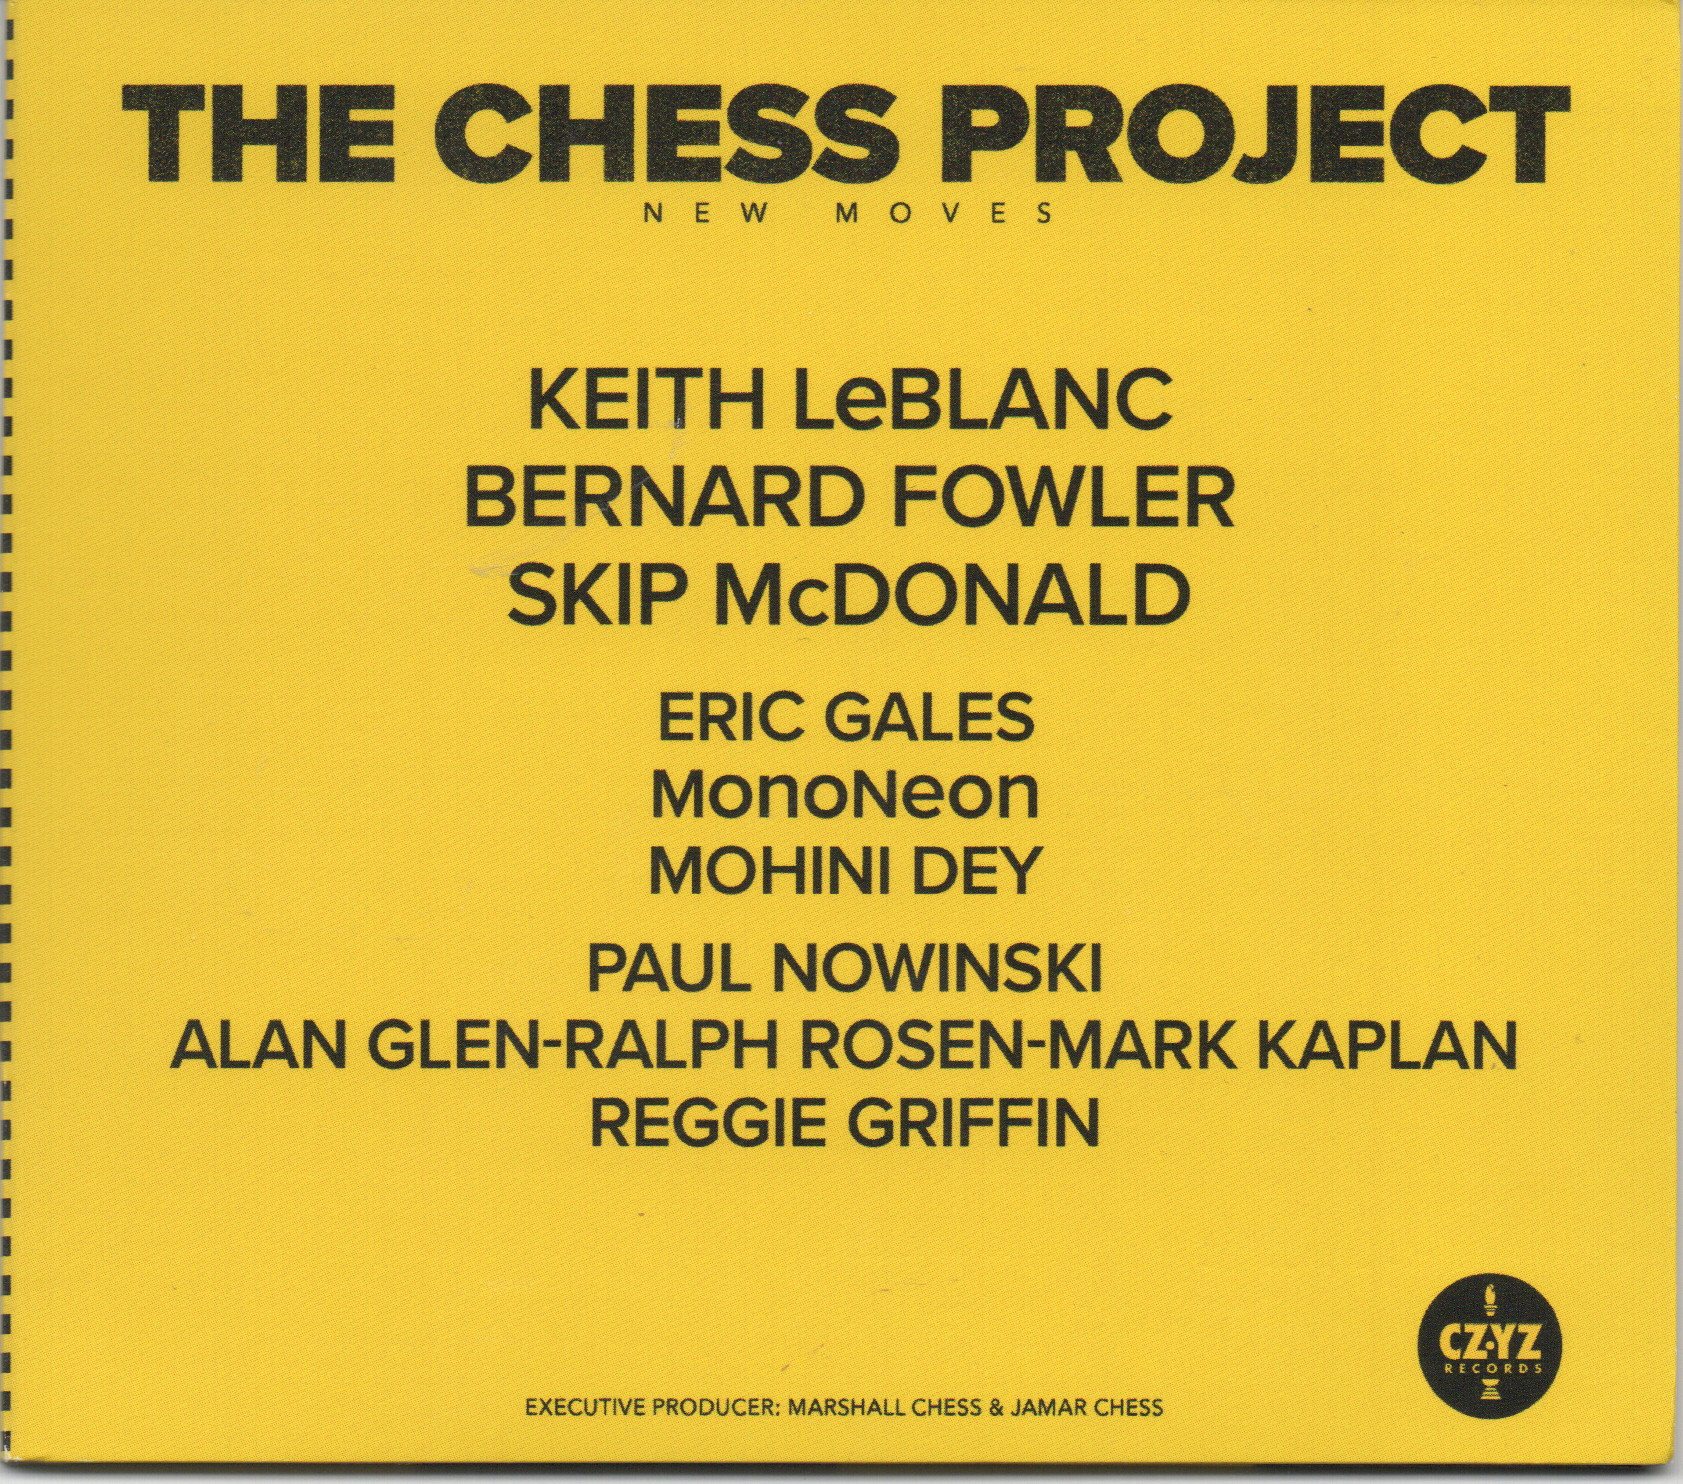 The Chess Project "New Moves: The Chess Project"